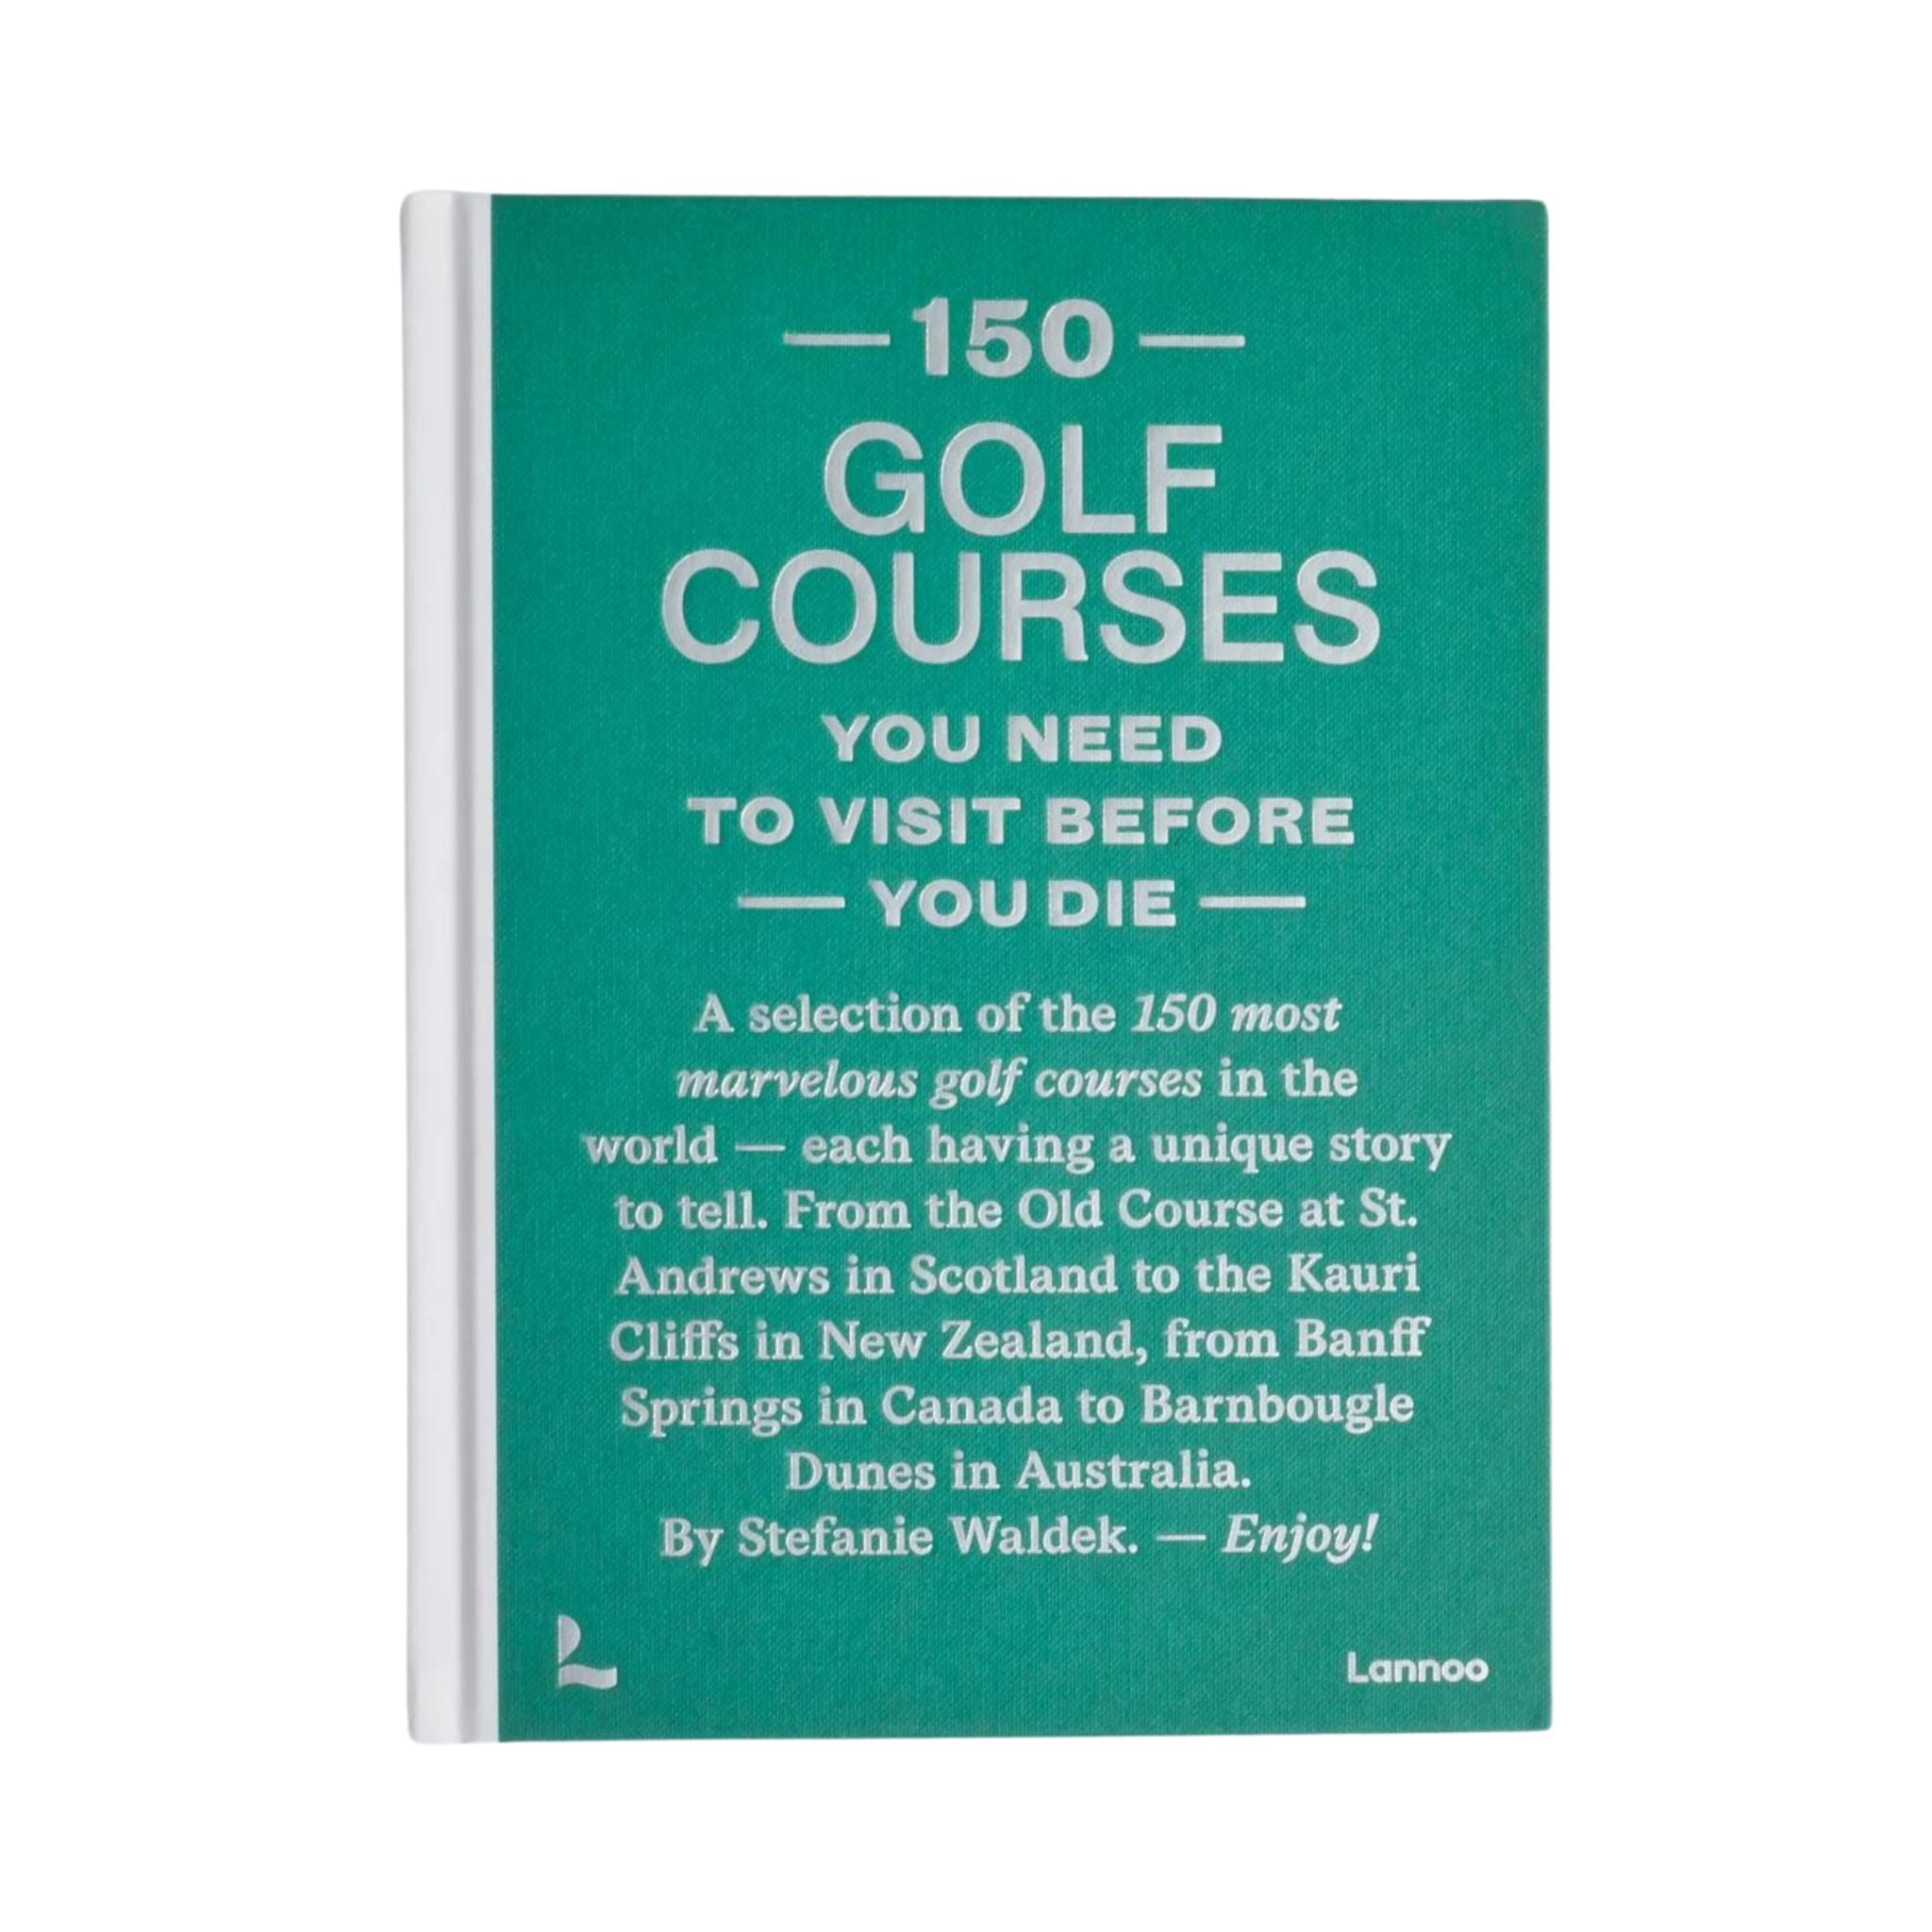 Book about 150 best golf courses around the world